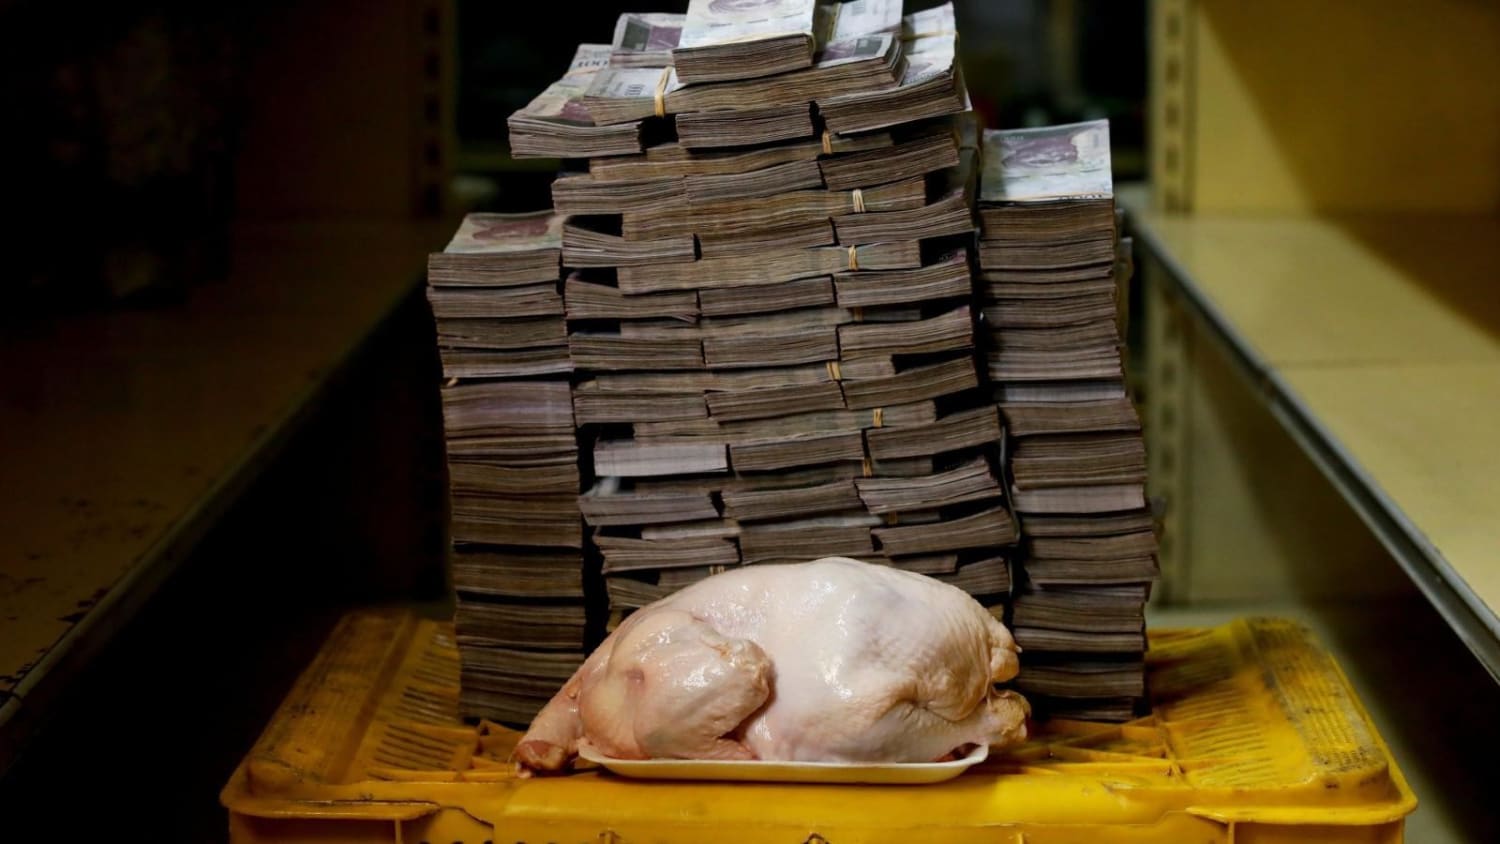 These pictures show just how much cash Venezuelans needed to buy even basic goods